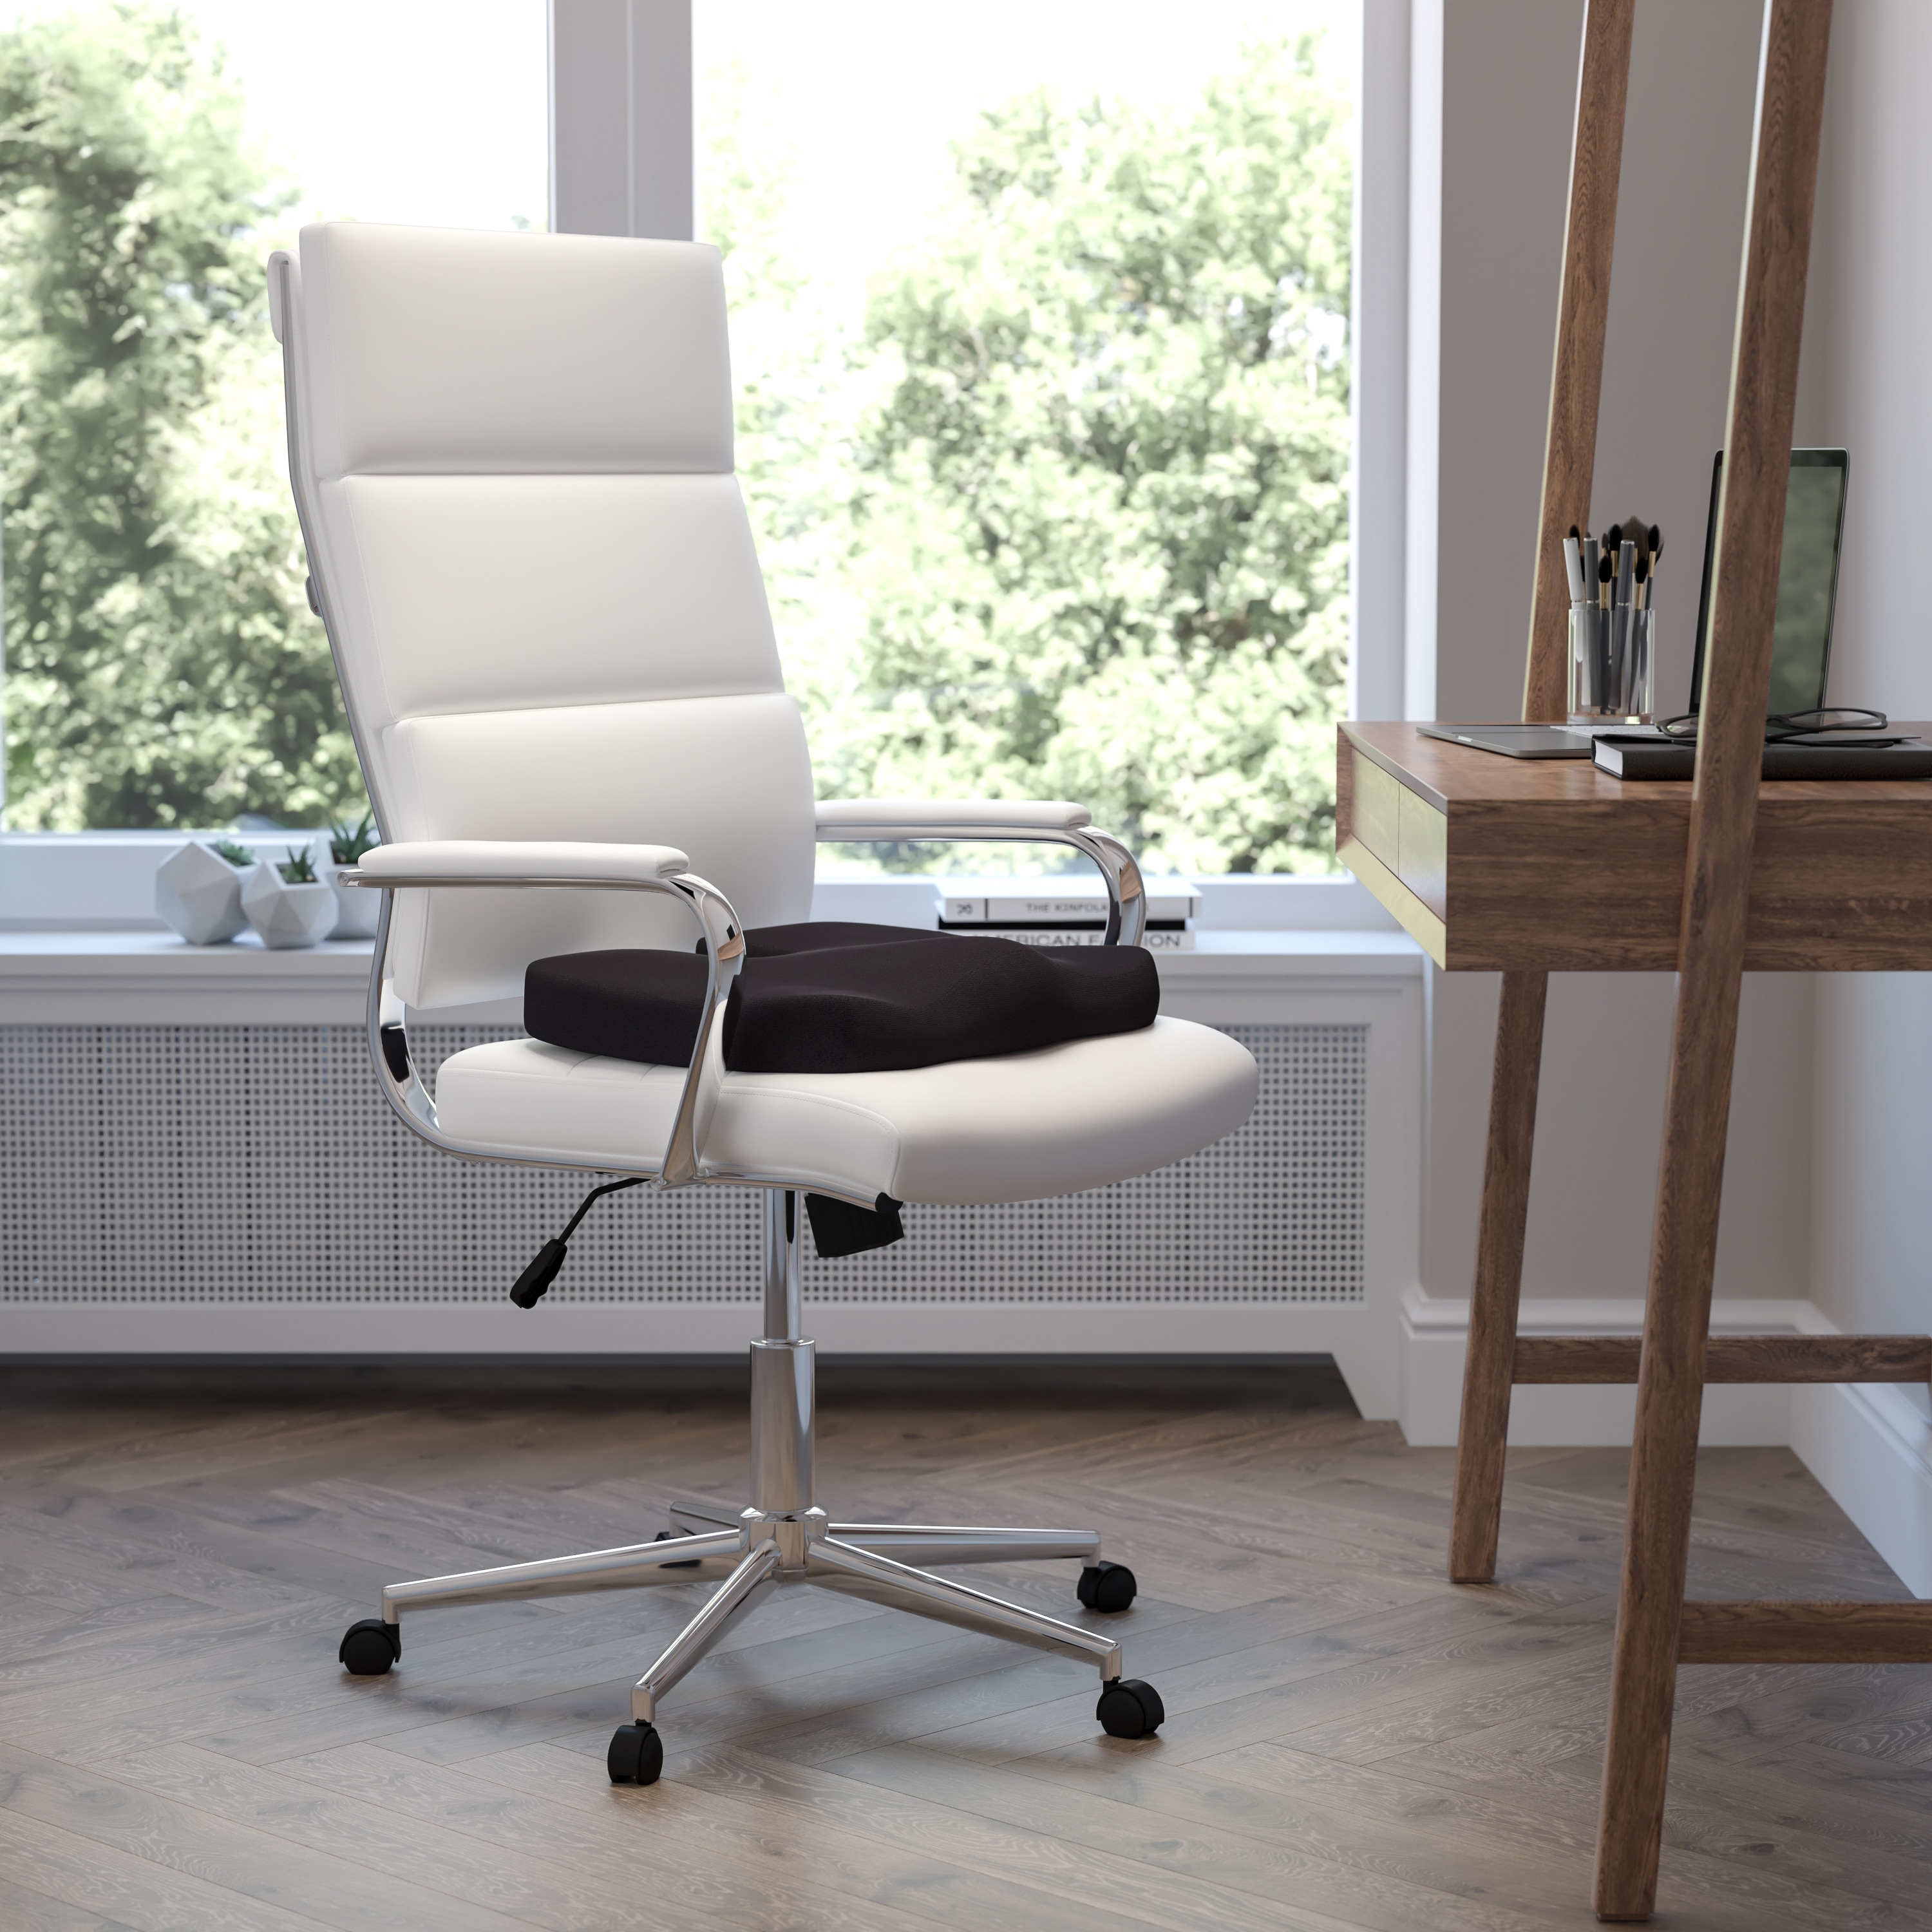 https://ak1.ostkcdn.com/images/products/is/images/direct/dbb5efc7ee5e36d9fdb65679b48eb687ad1741e6/Contoured-Office-Chair-Cushion---Certi-PUR-US-Certified-100%25-Memory-Foam.jpg